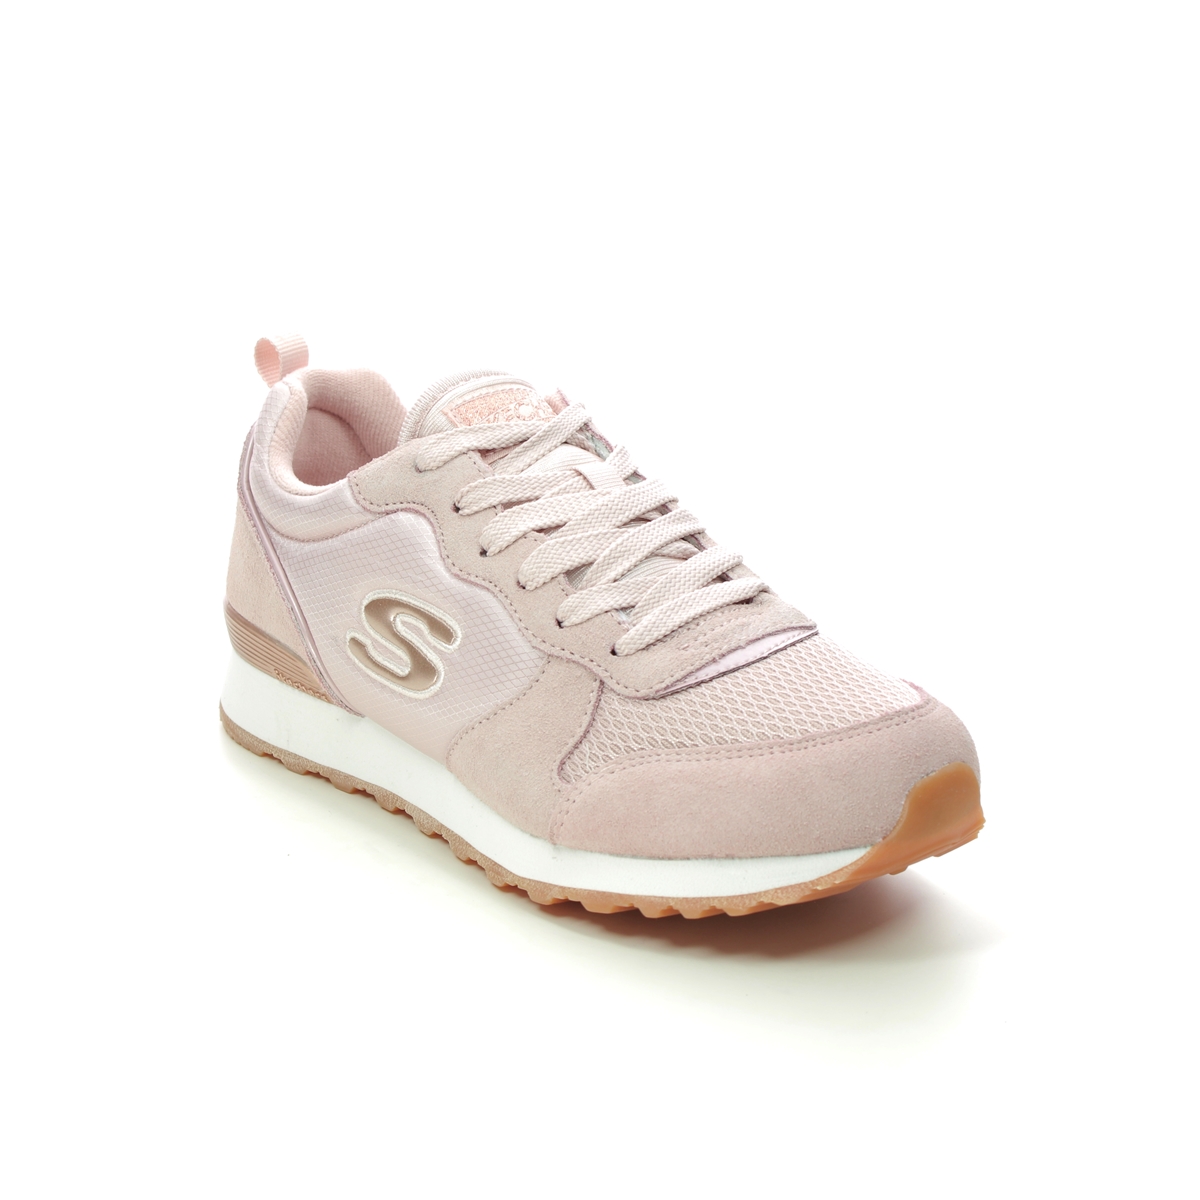 Skechers Og 85 Gold Gurl BLSH Blush Pink Womens trainers 111 in a Plain Leather and Textile in Size 3